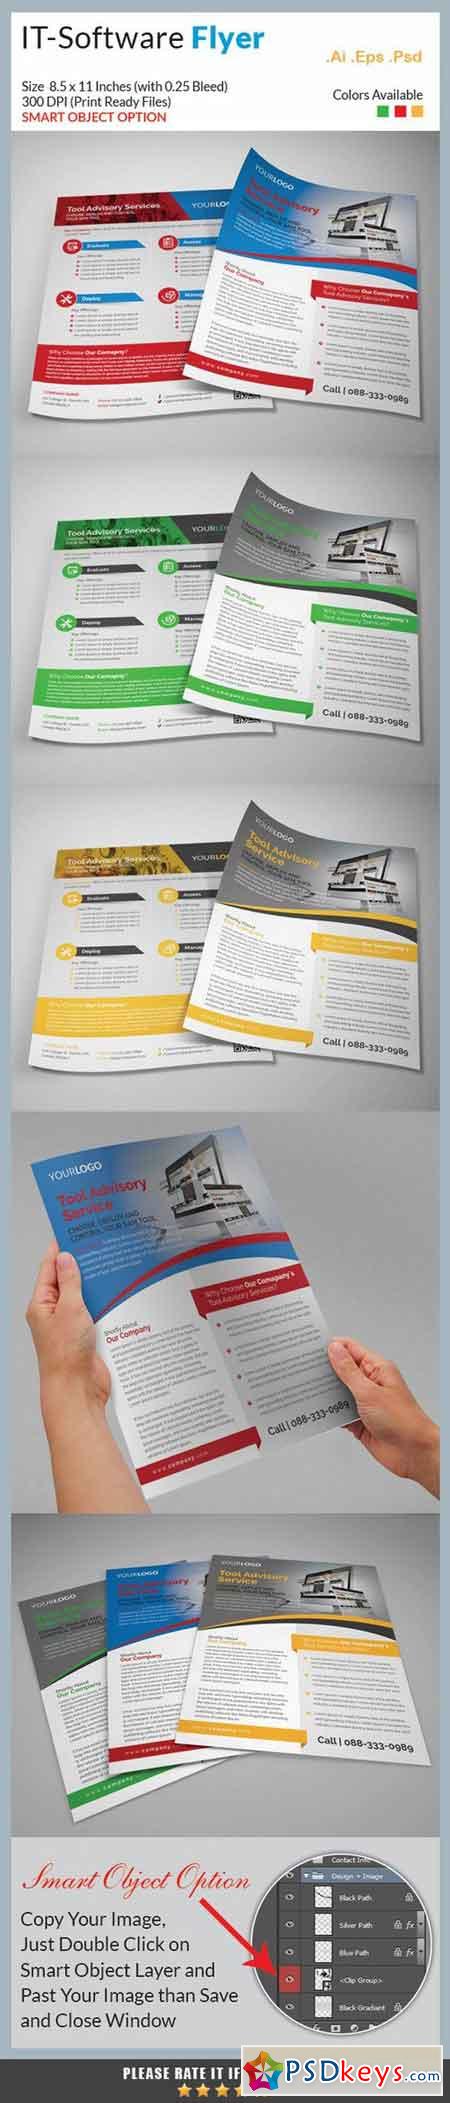 IT and Software Flyers 615669